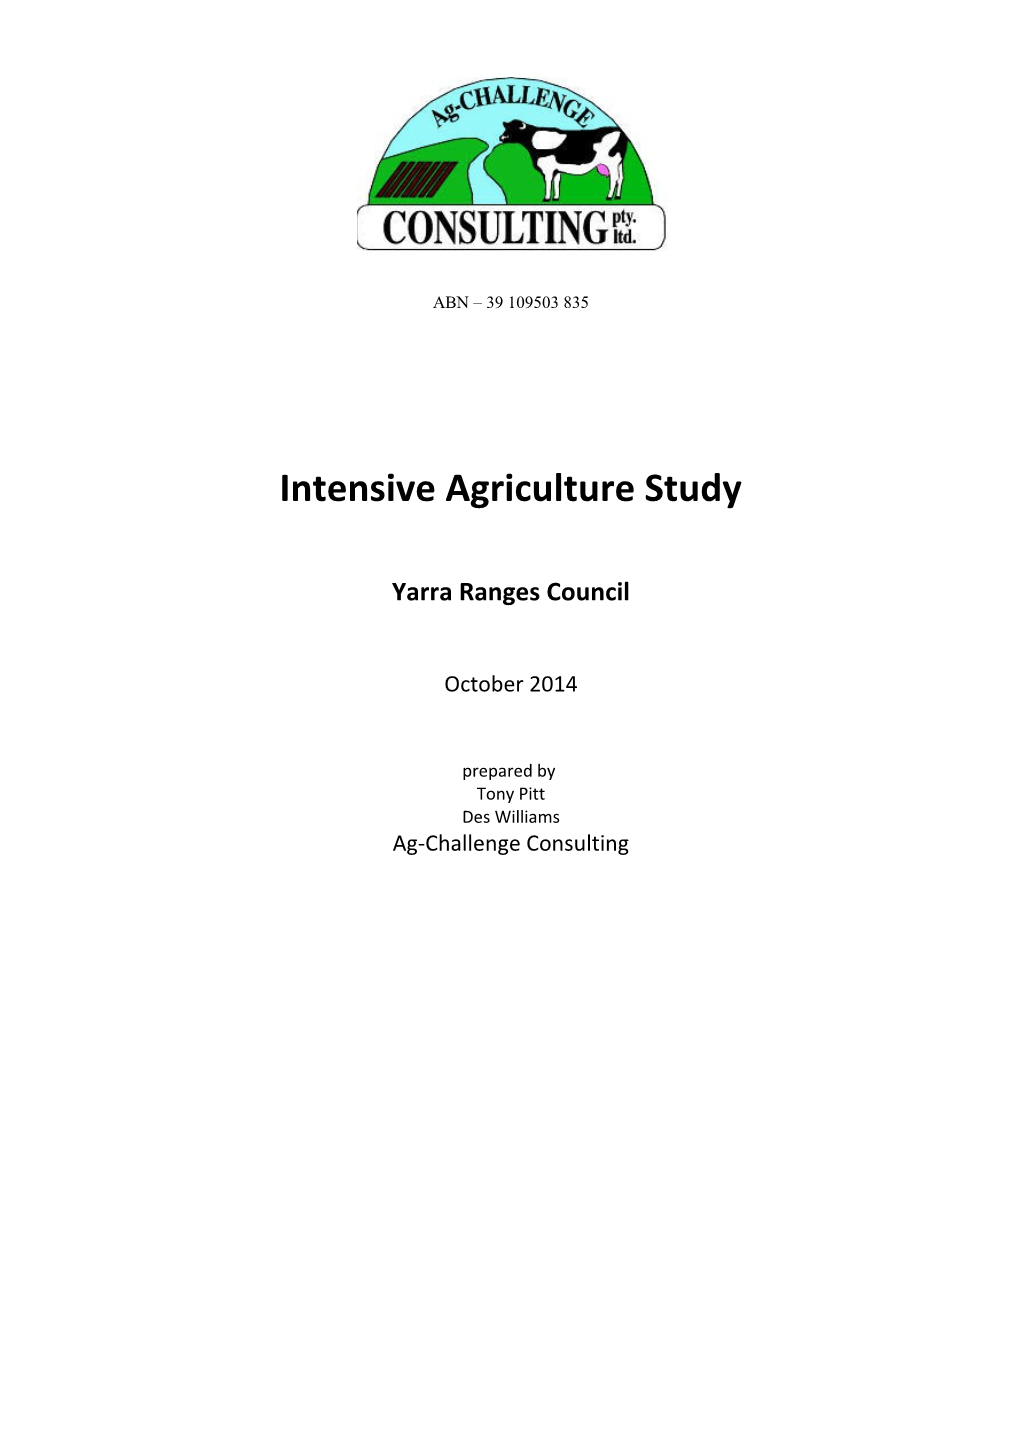 Intensive Agriculture Study - Yarra Ranges Council